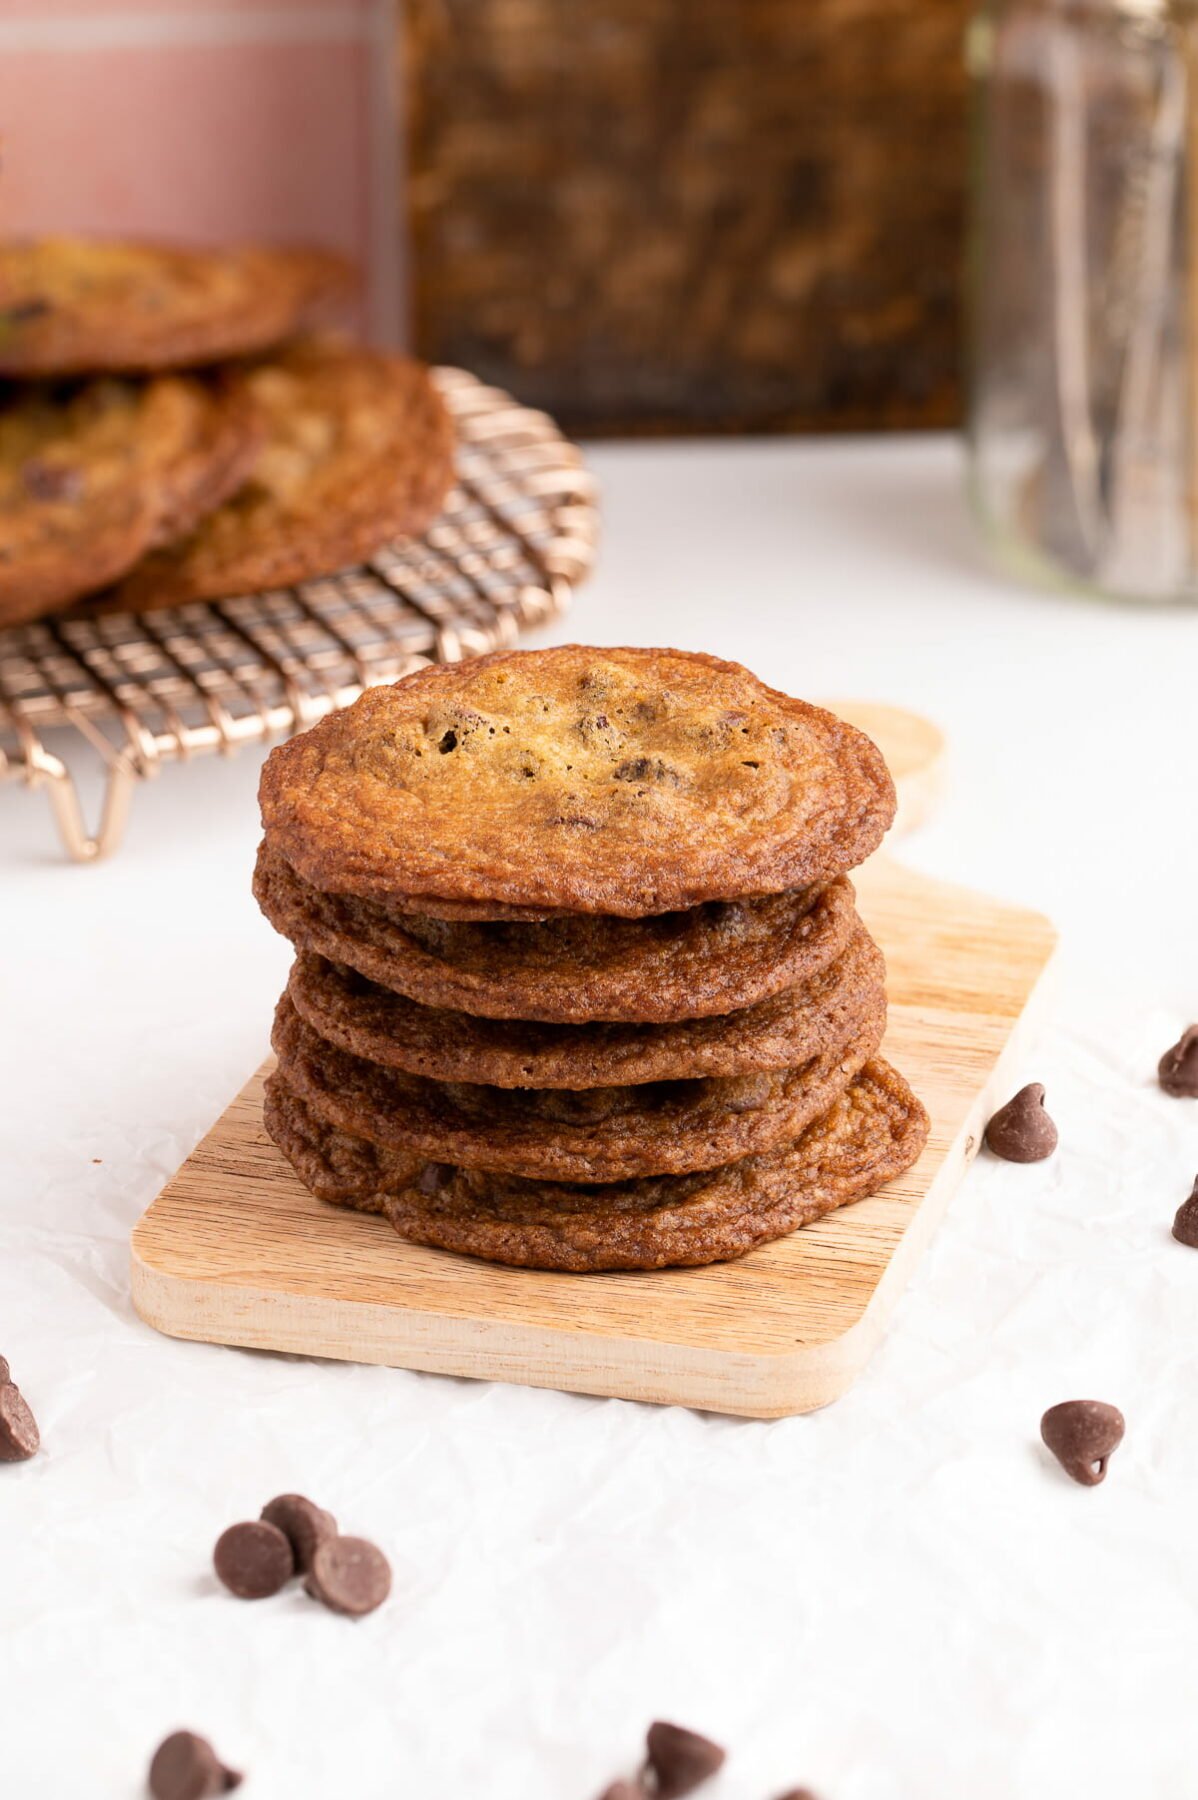 crispy chocolate chip cookies stacked on serving board.